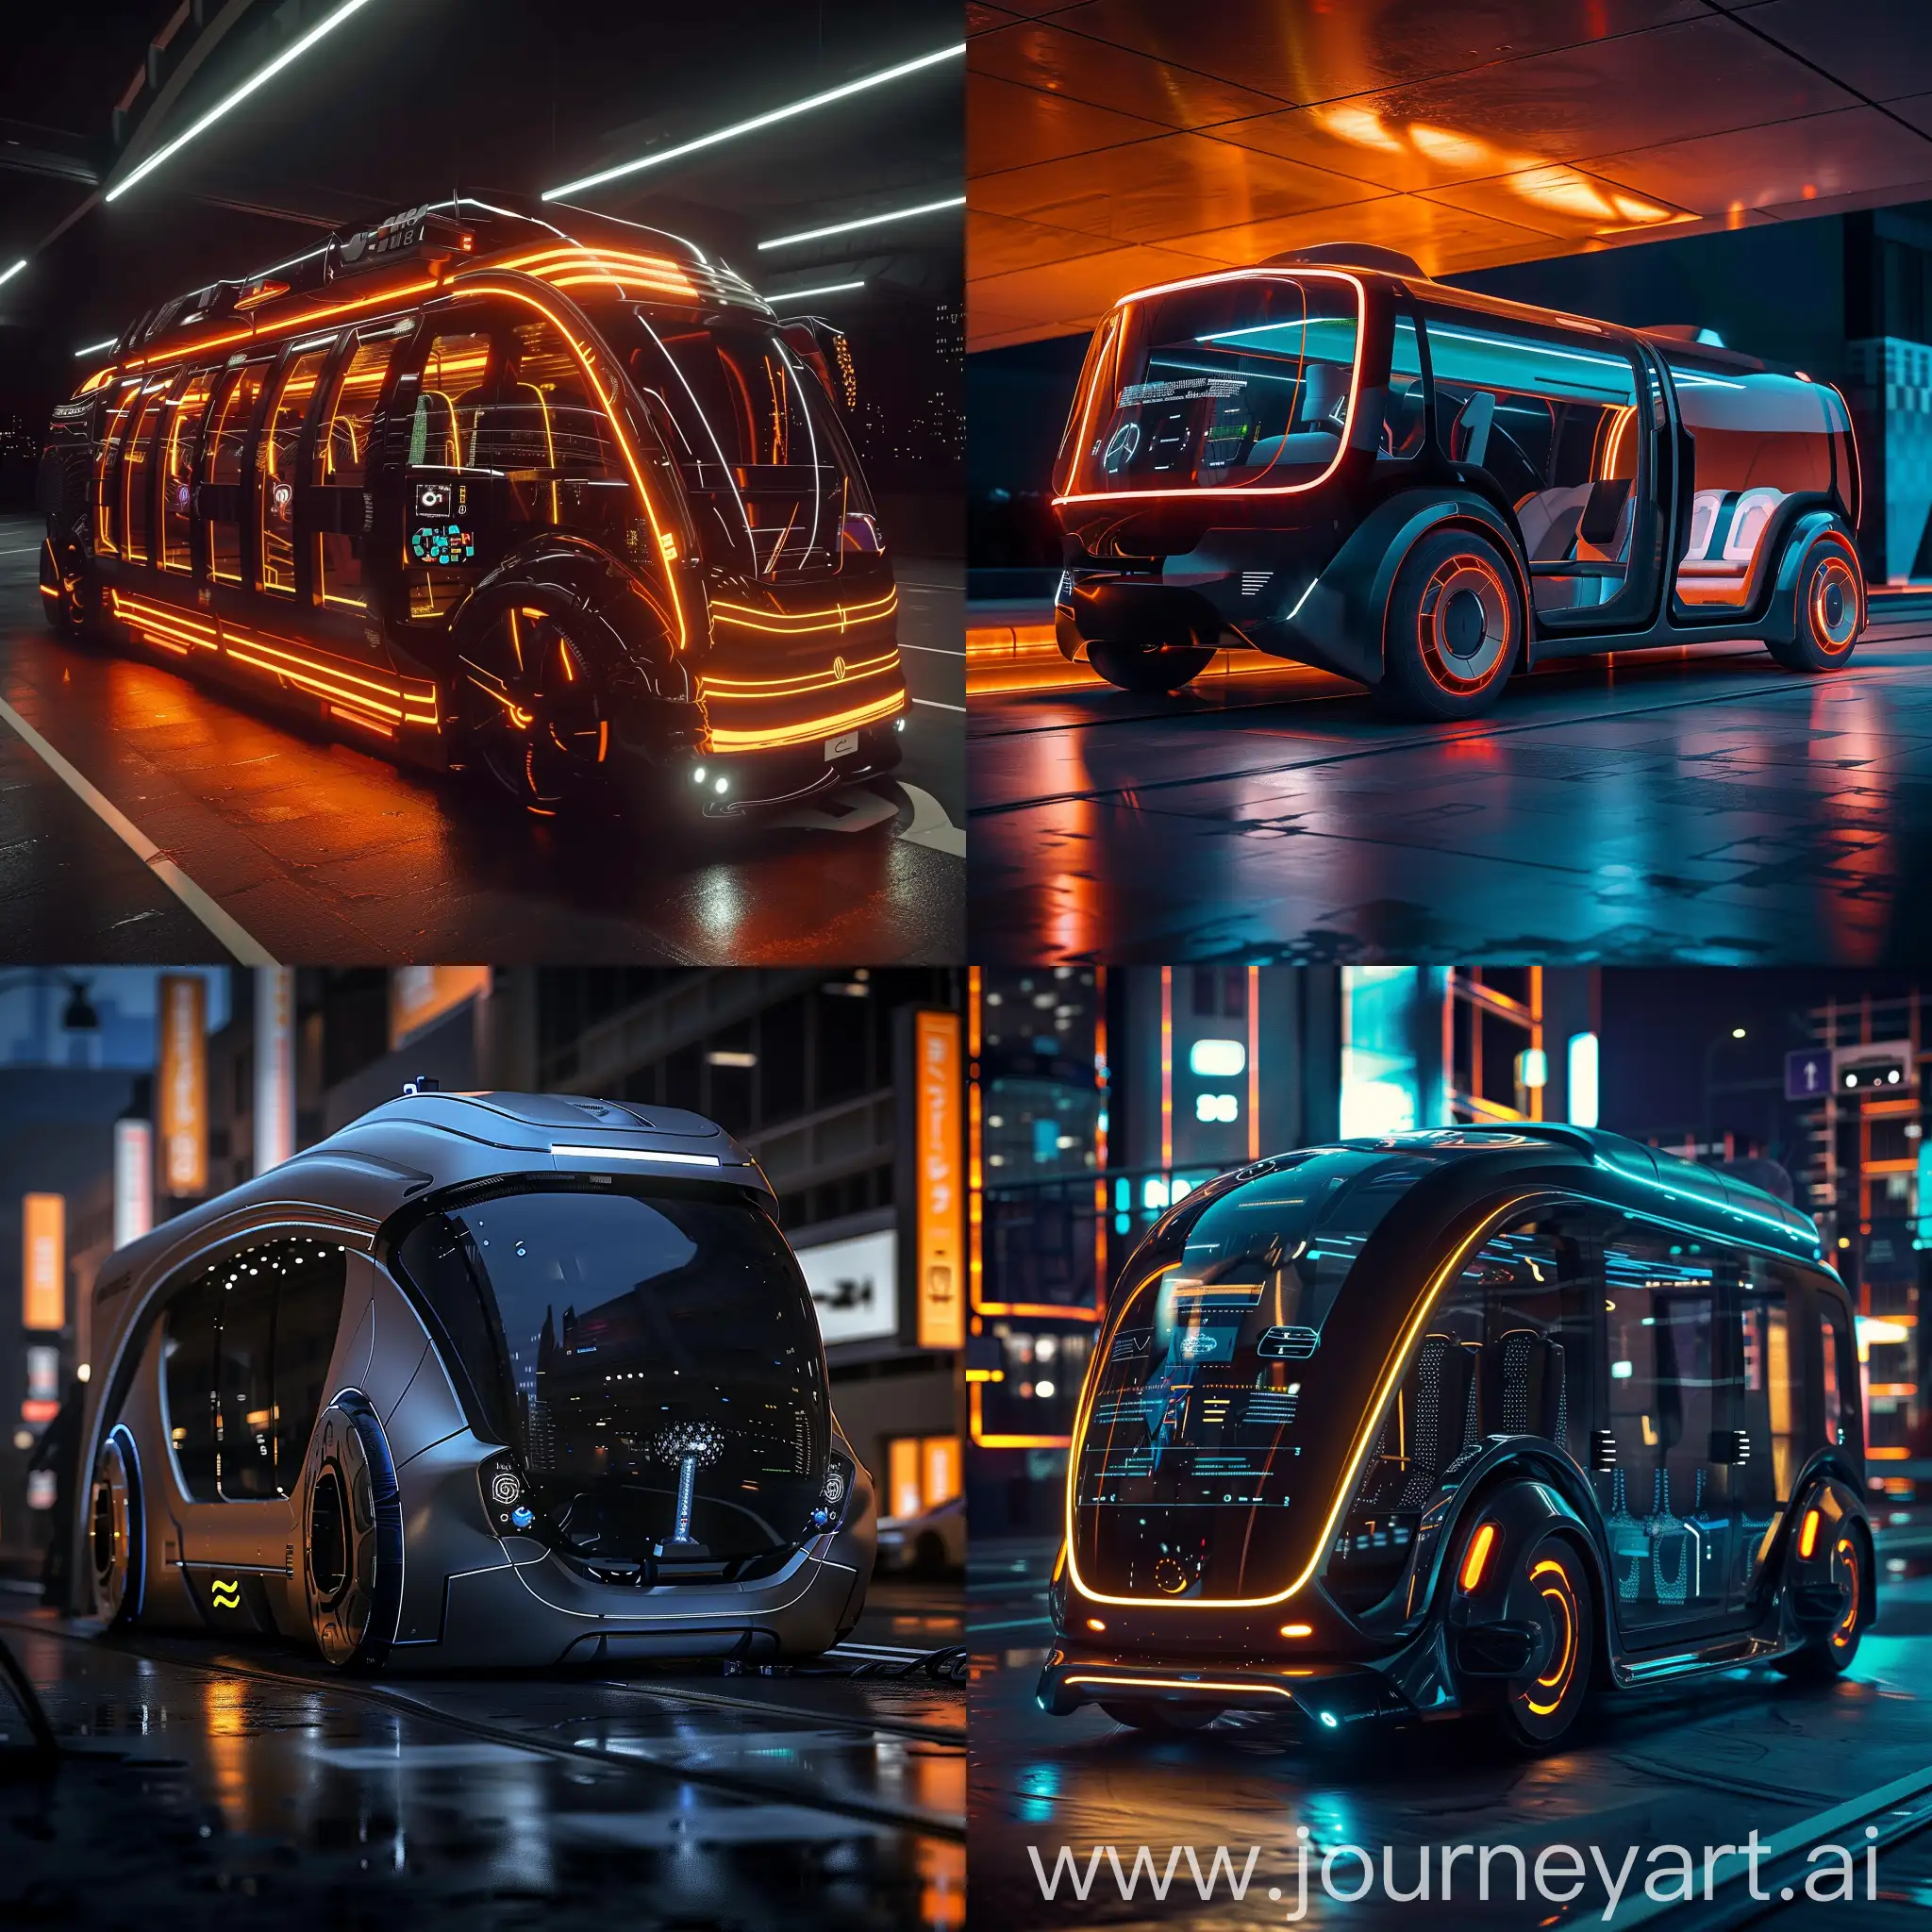 Sci-Fi microbus, Advanced Science and Technology, Advanced, Autonomous Driving System, Electric Powertrain, Regenerative Braking, Augmented Reality Dashboard, AI-Powered Interface, Modular Interior Design, Advanced HVAC System, Energy Harvesting Suspension, Wireless Charging, Smart Glass Technology, Aerodynamic Shape, Solar Panel Integration, Active Aero Elements, Smart Wheels, LED Matrix Lighting, Holographic Indicators, Electrochromic Paint, Retractable Door Handles, Drone Docking Station, Lightweight Composite Materials, In Unreal Engine 5 Style --stylize 1000